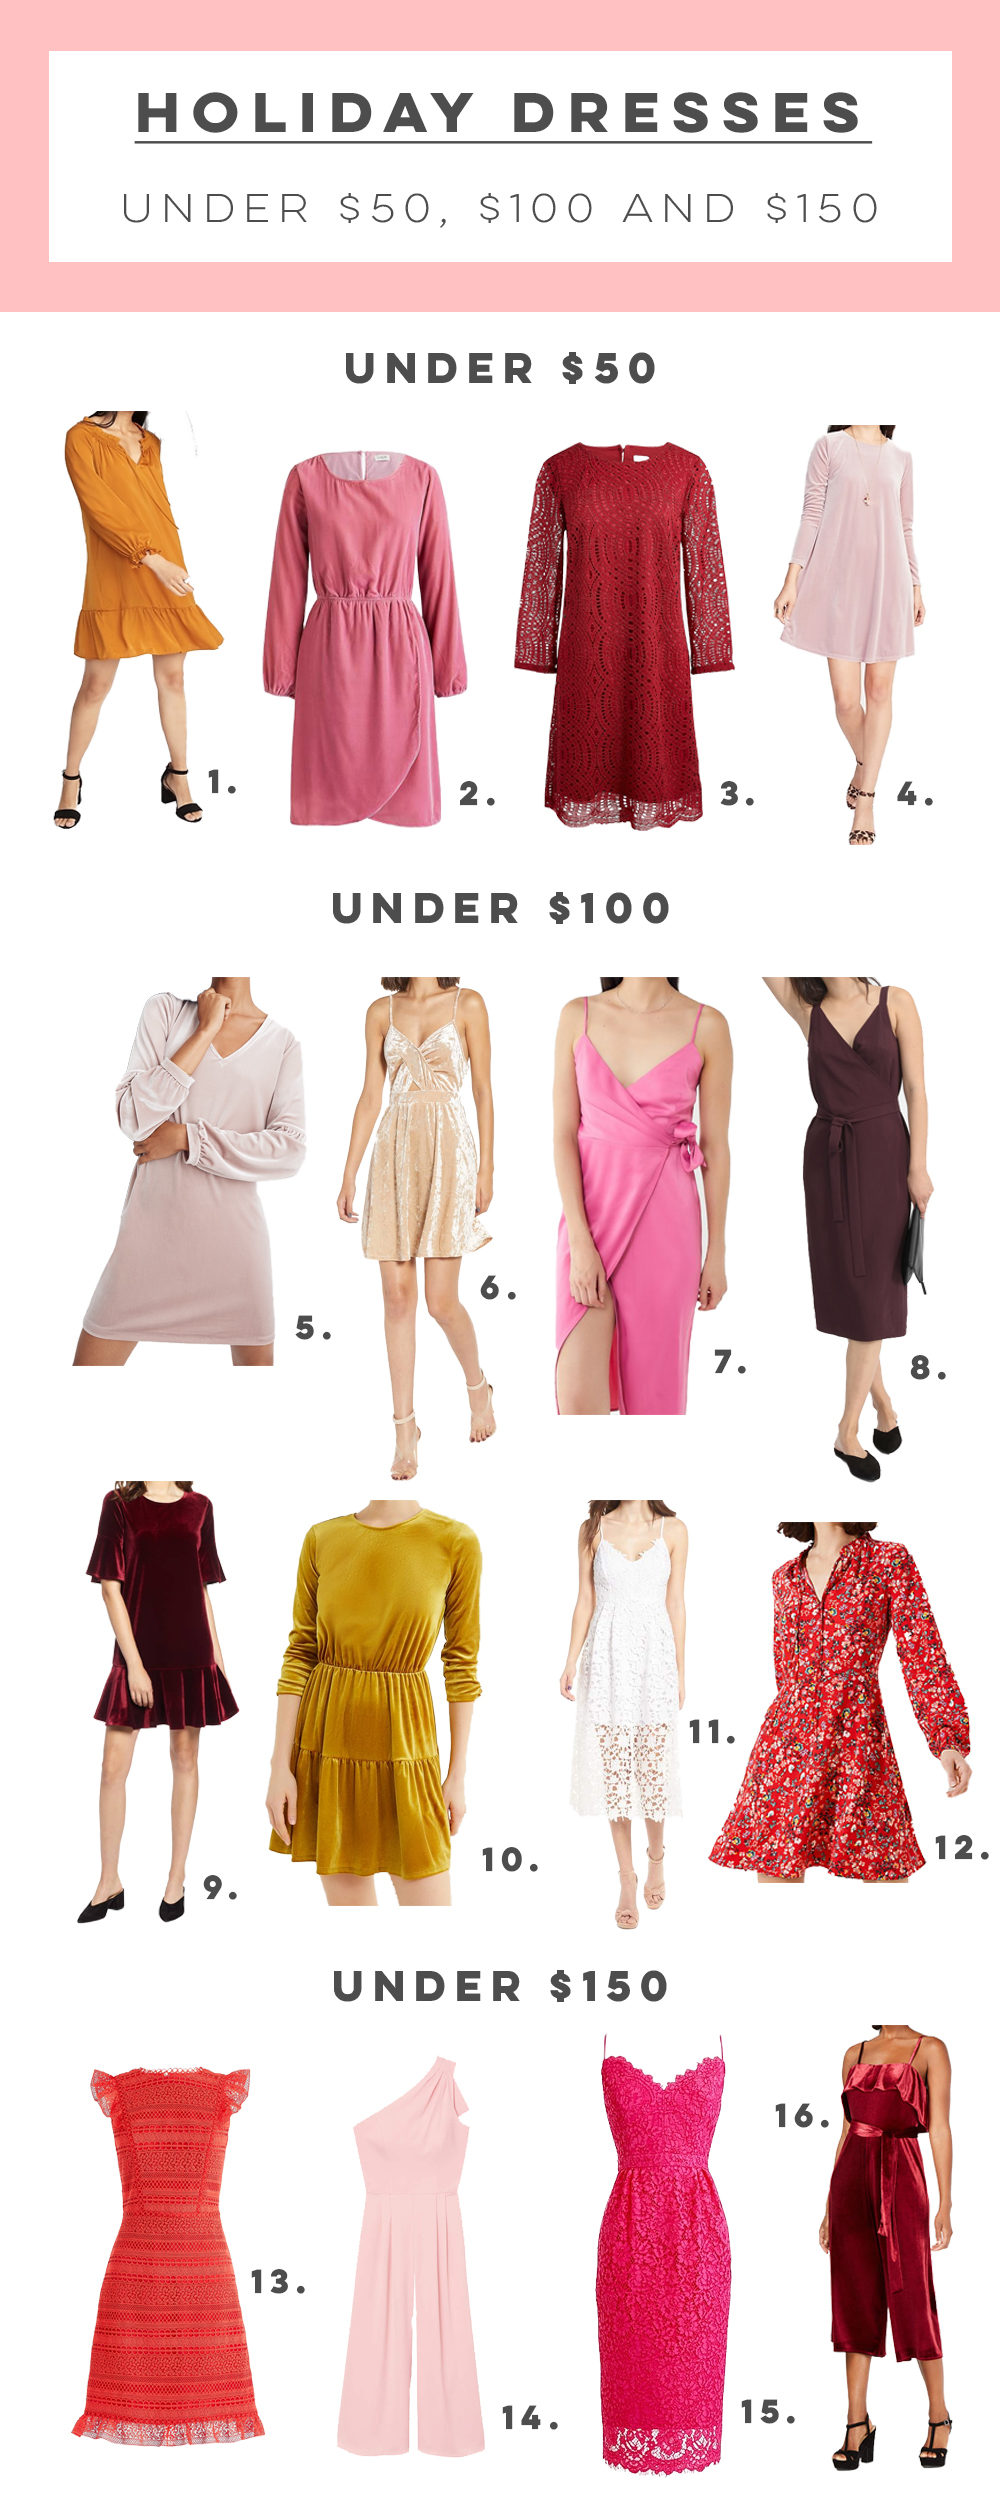 16 Holiday Party Dresses for A Girl on a Budget | Under $50, $100 and $150 | Christmas Dresses | Holiday Party Outfit | Christmas Outfit Idea | Holiday Dress Ideas | Christmas Party Outfit Fancy | Christmas Party Attire - More on www.sunshinestyleblog.com